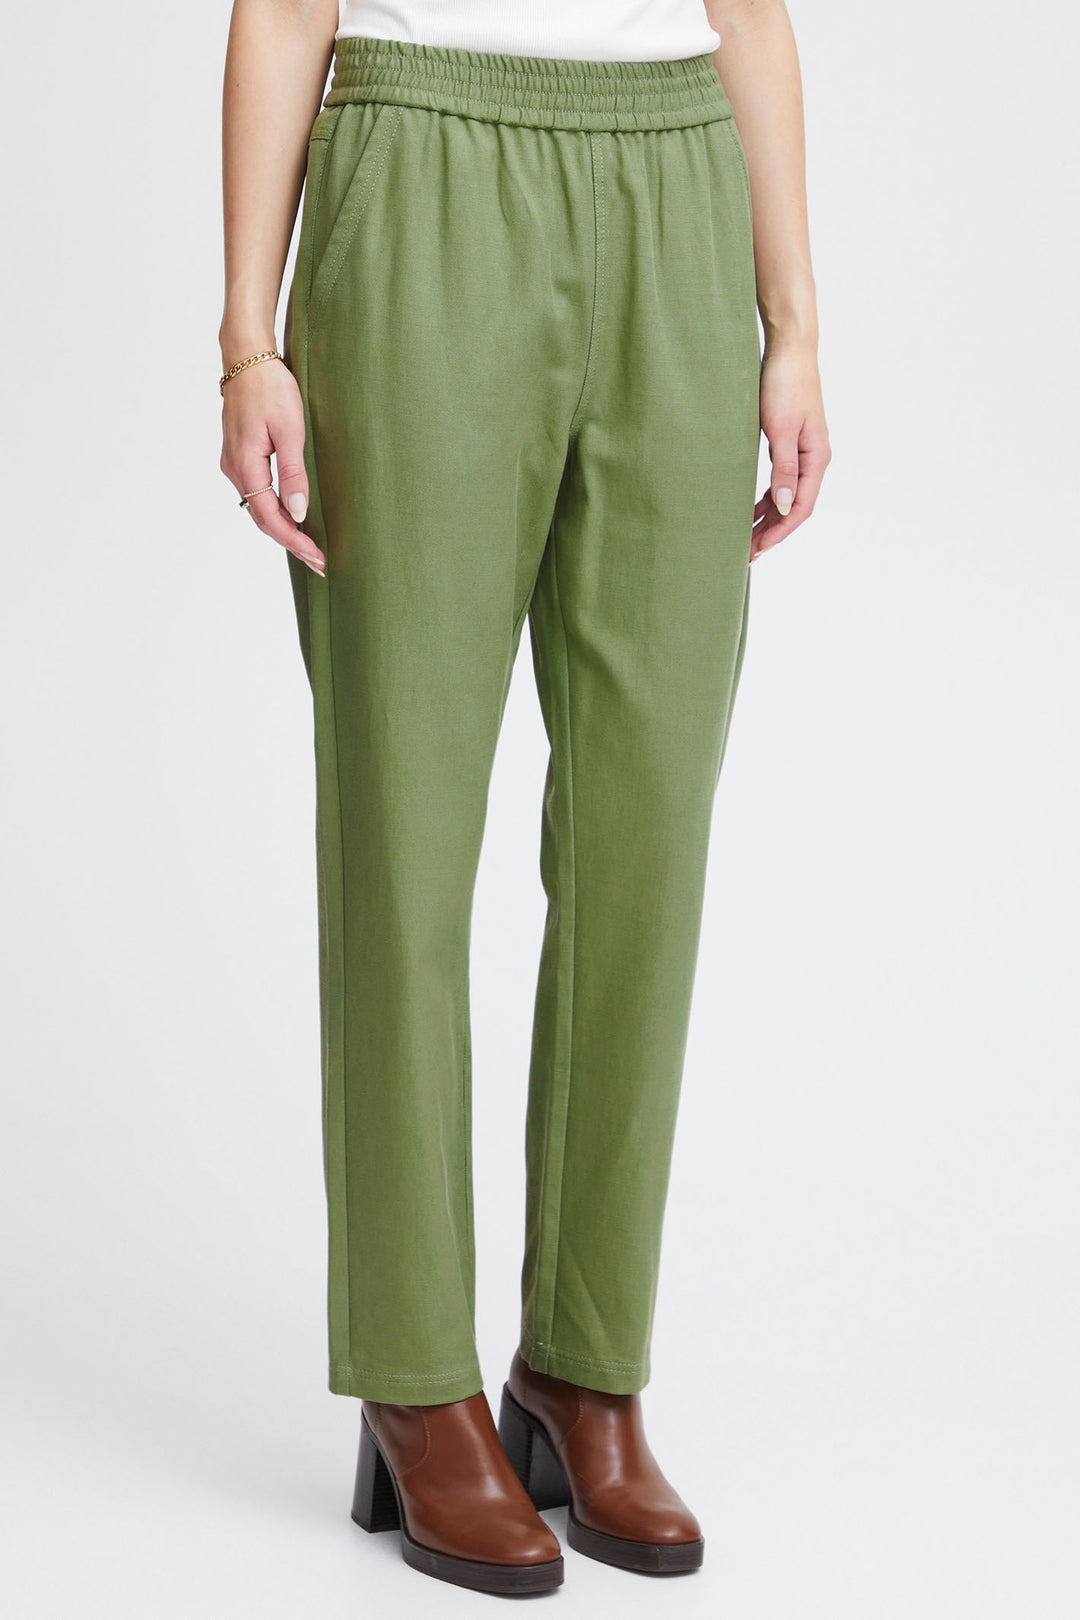 Atelier Reve Irrouge 20119939 Watercress Green Pull-On Trousers